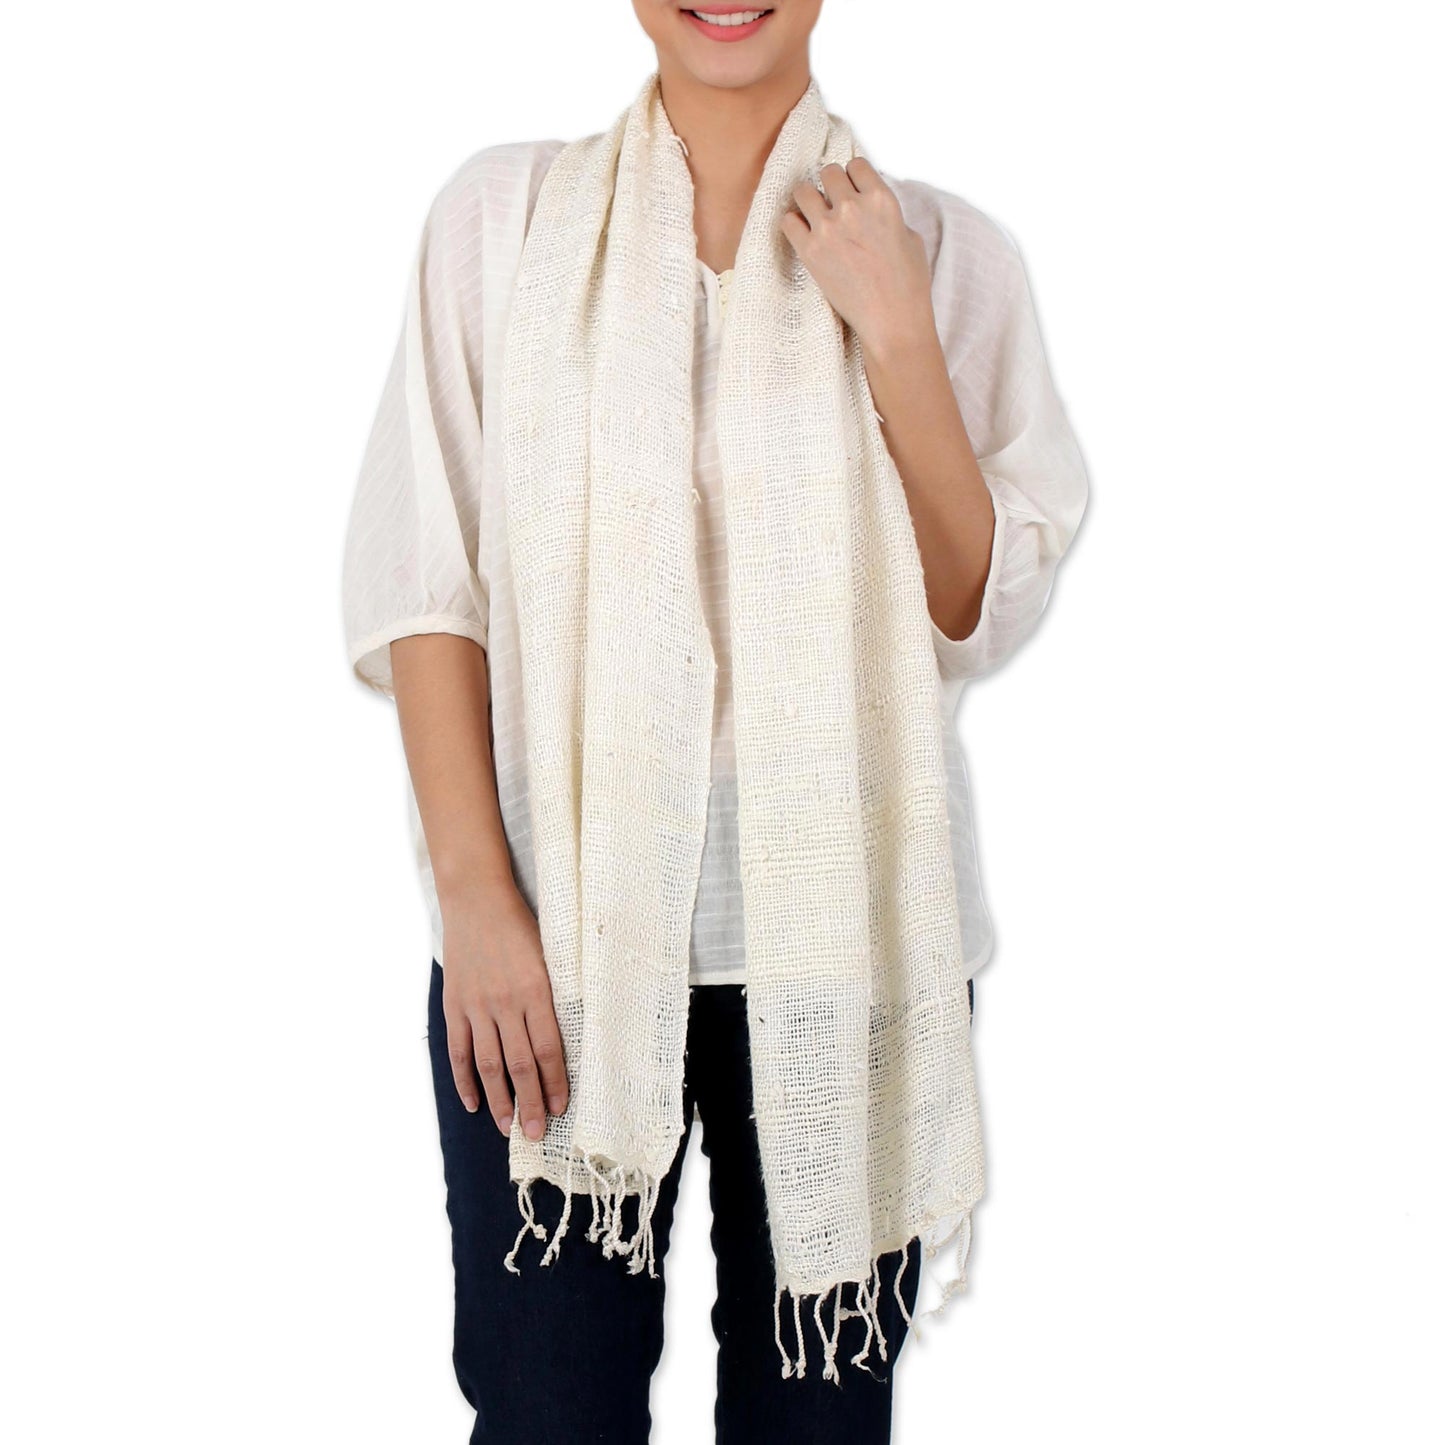 Afternoon Breeze Handwoven Fringed Silk Shawl in Ivory from Thailand